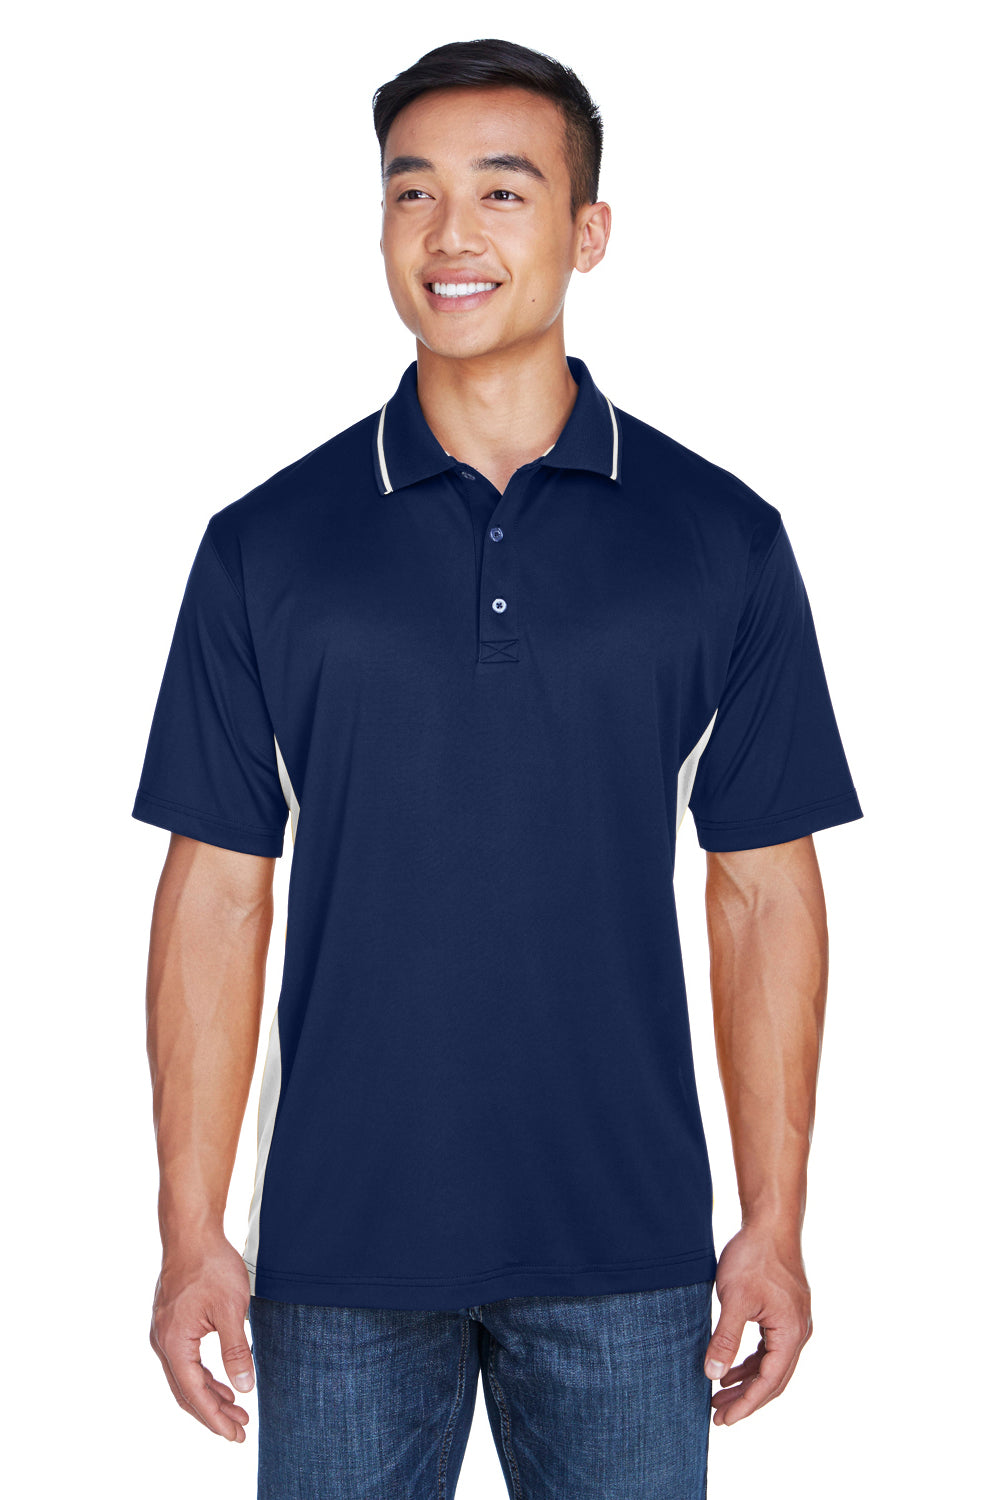 UltraClub 8406 Mens Cool & Dry Moisture Wicking Short Sleeve Polo Shirt Navy Blue/White Front